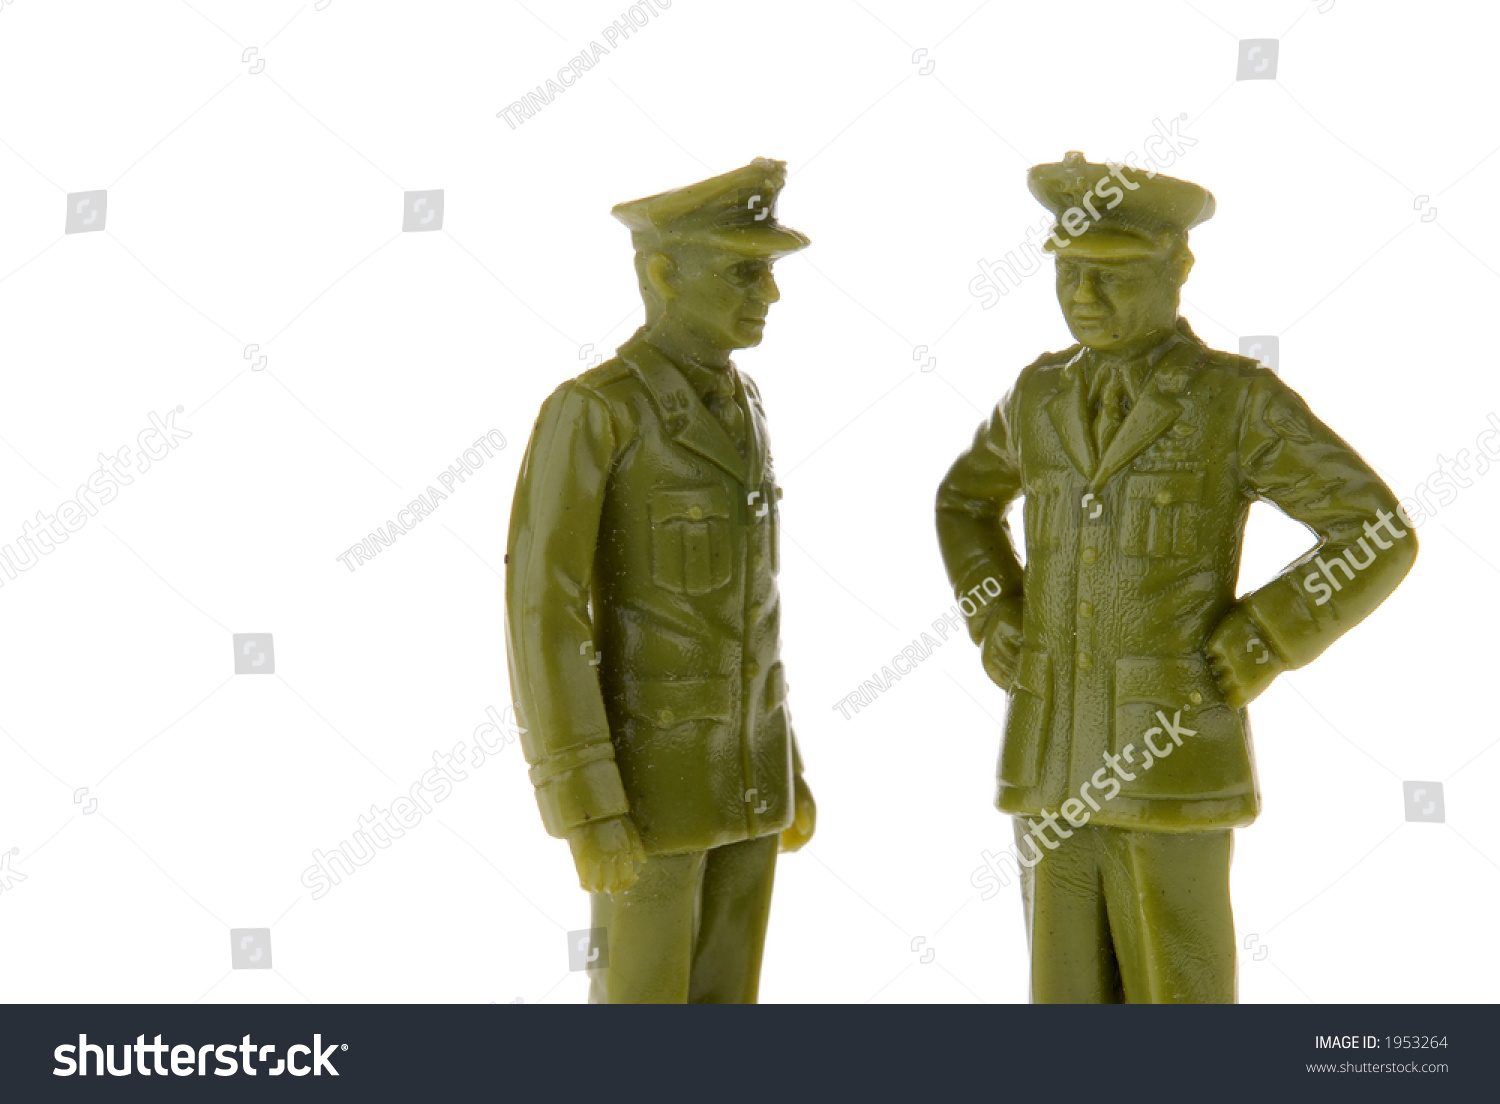 stock-photo-two-plastic-toy-army-generals-talking-1953264.jpg